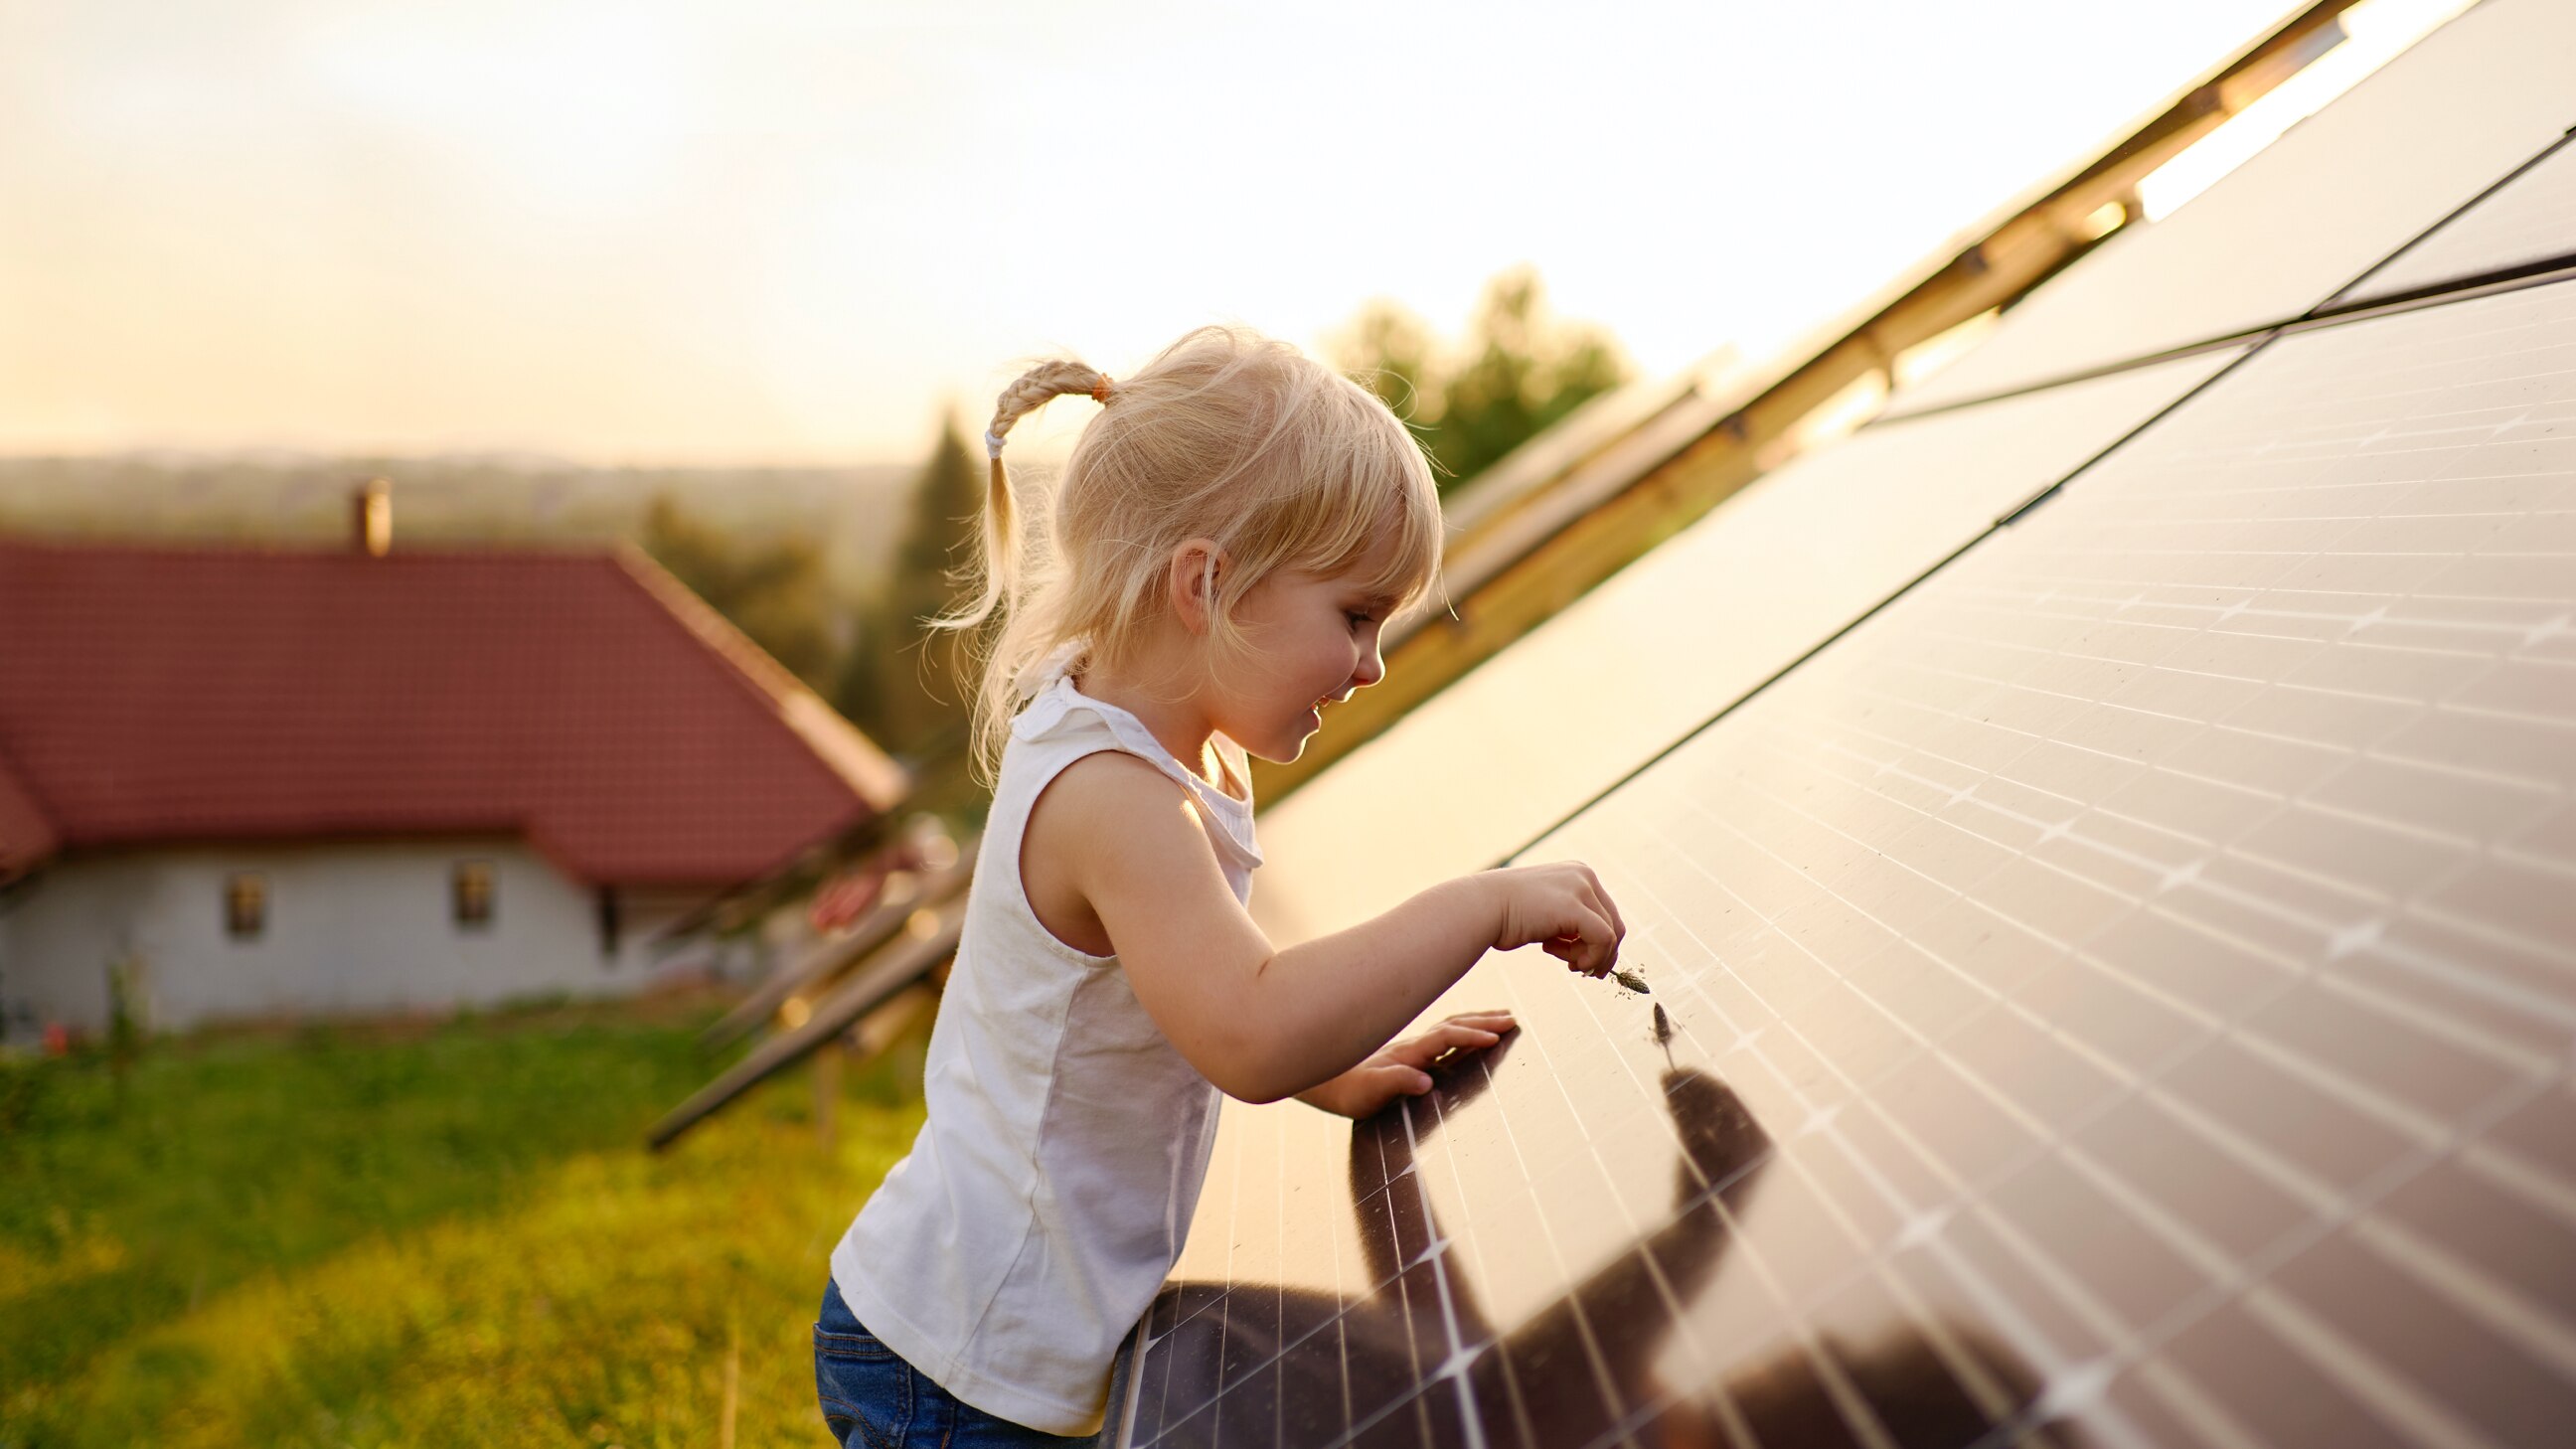 Little girl up close interacting with a solar panel outdoors. Her house is seen in the background.